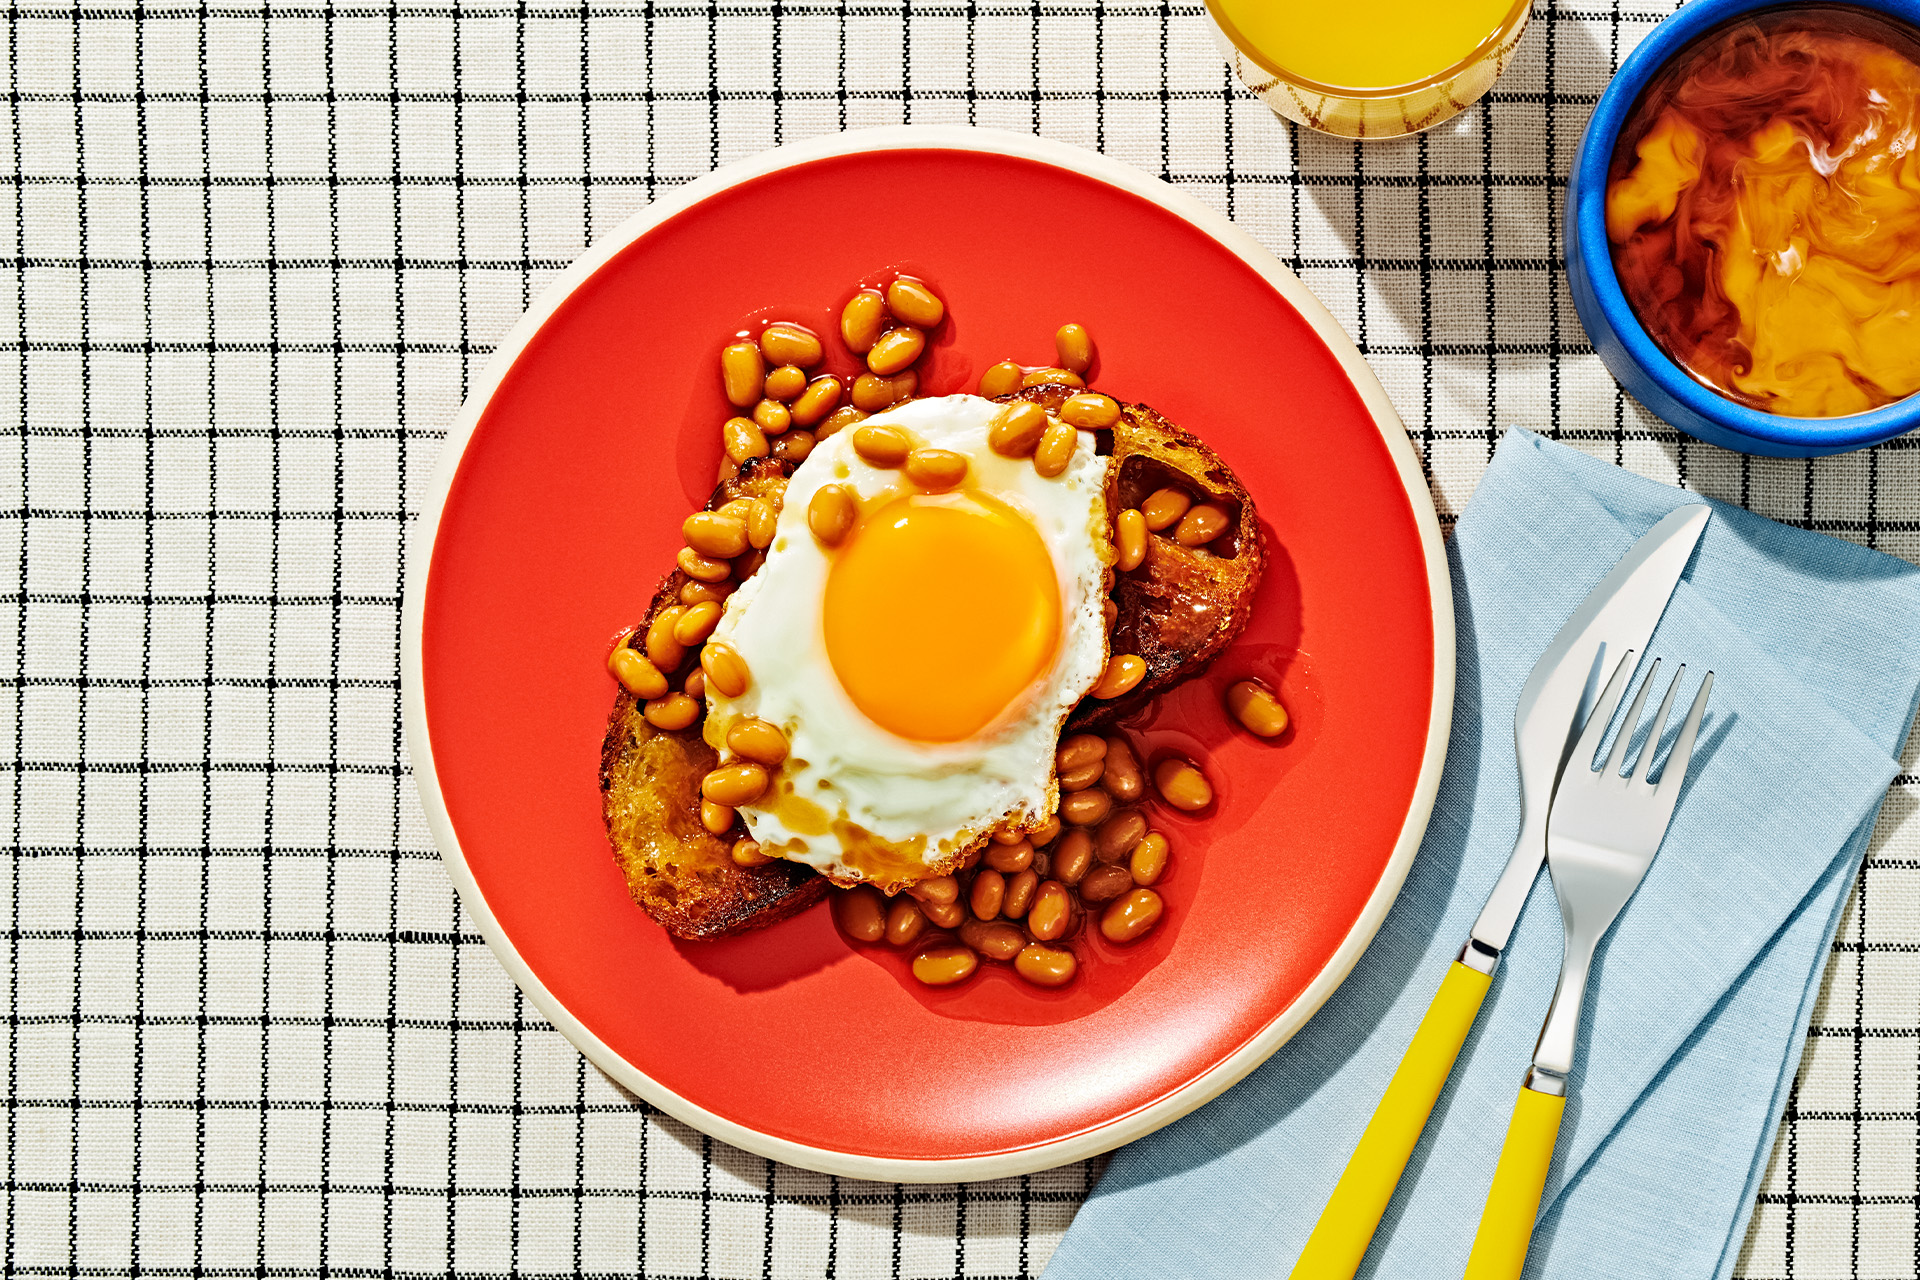 Sunny side up egg on a piece of toast covered in baked beans on a red plate